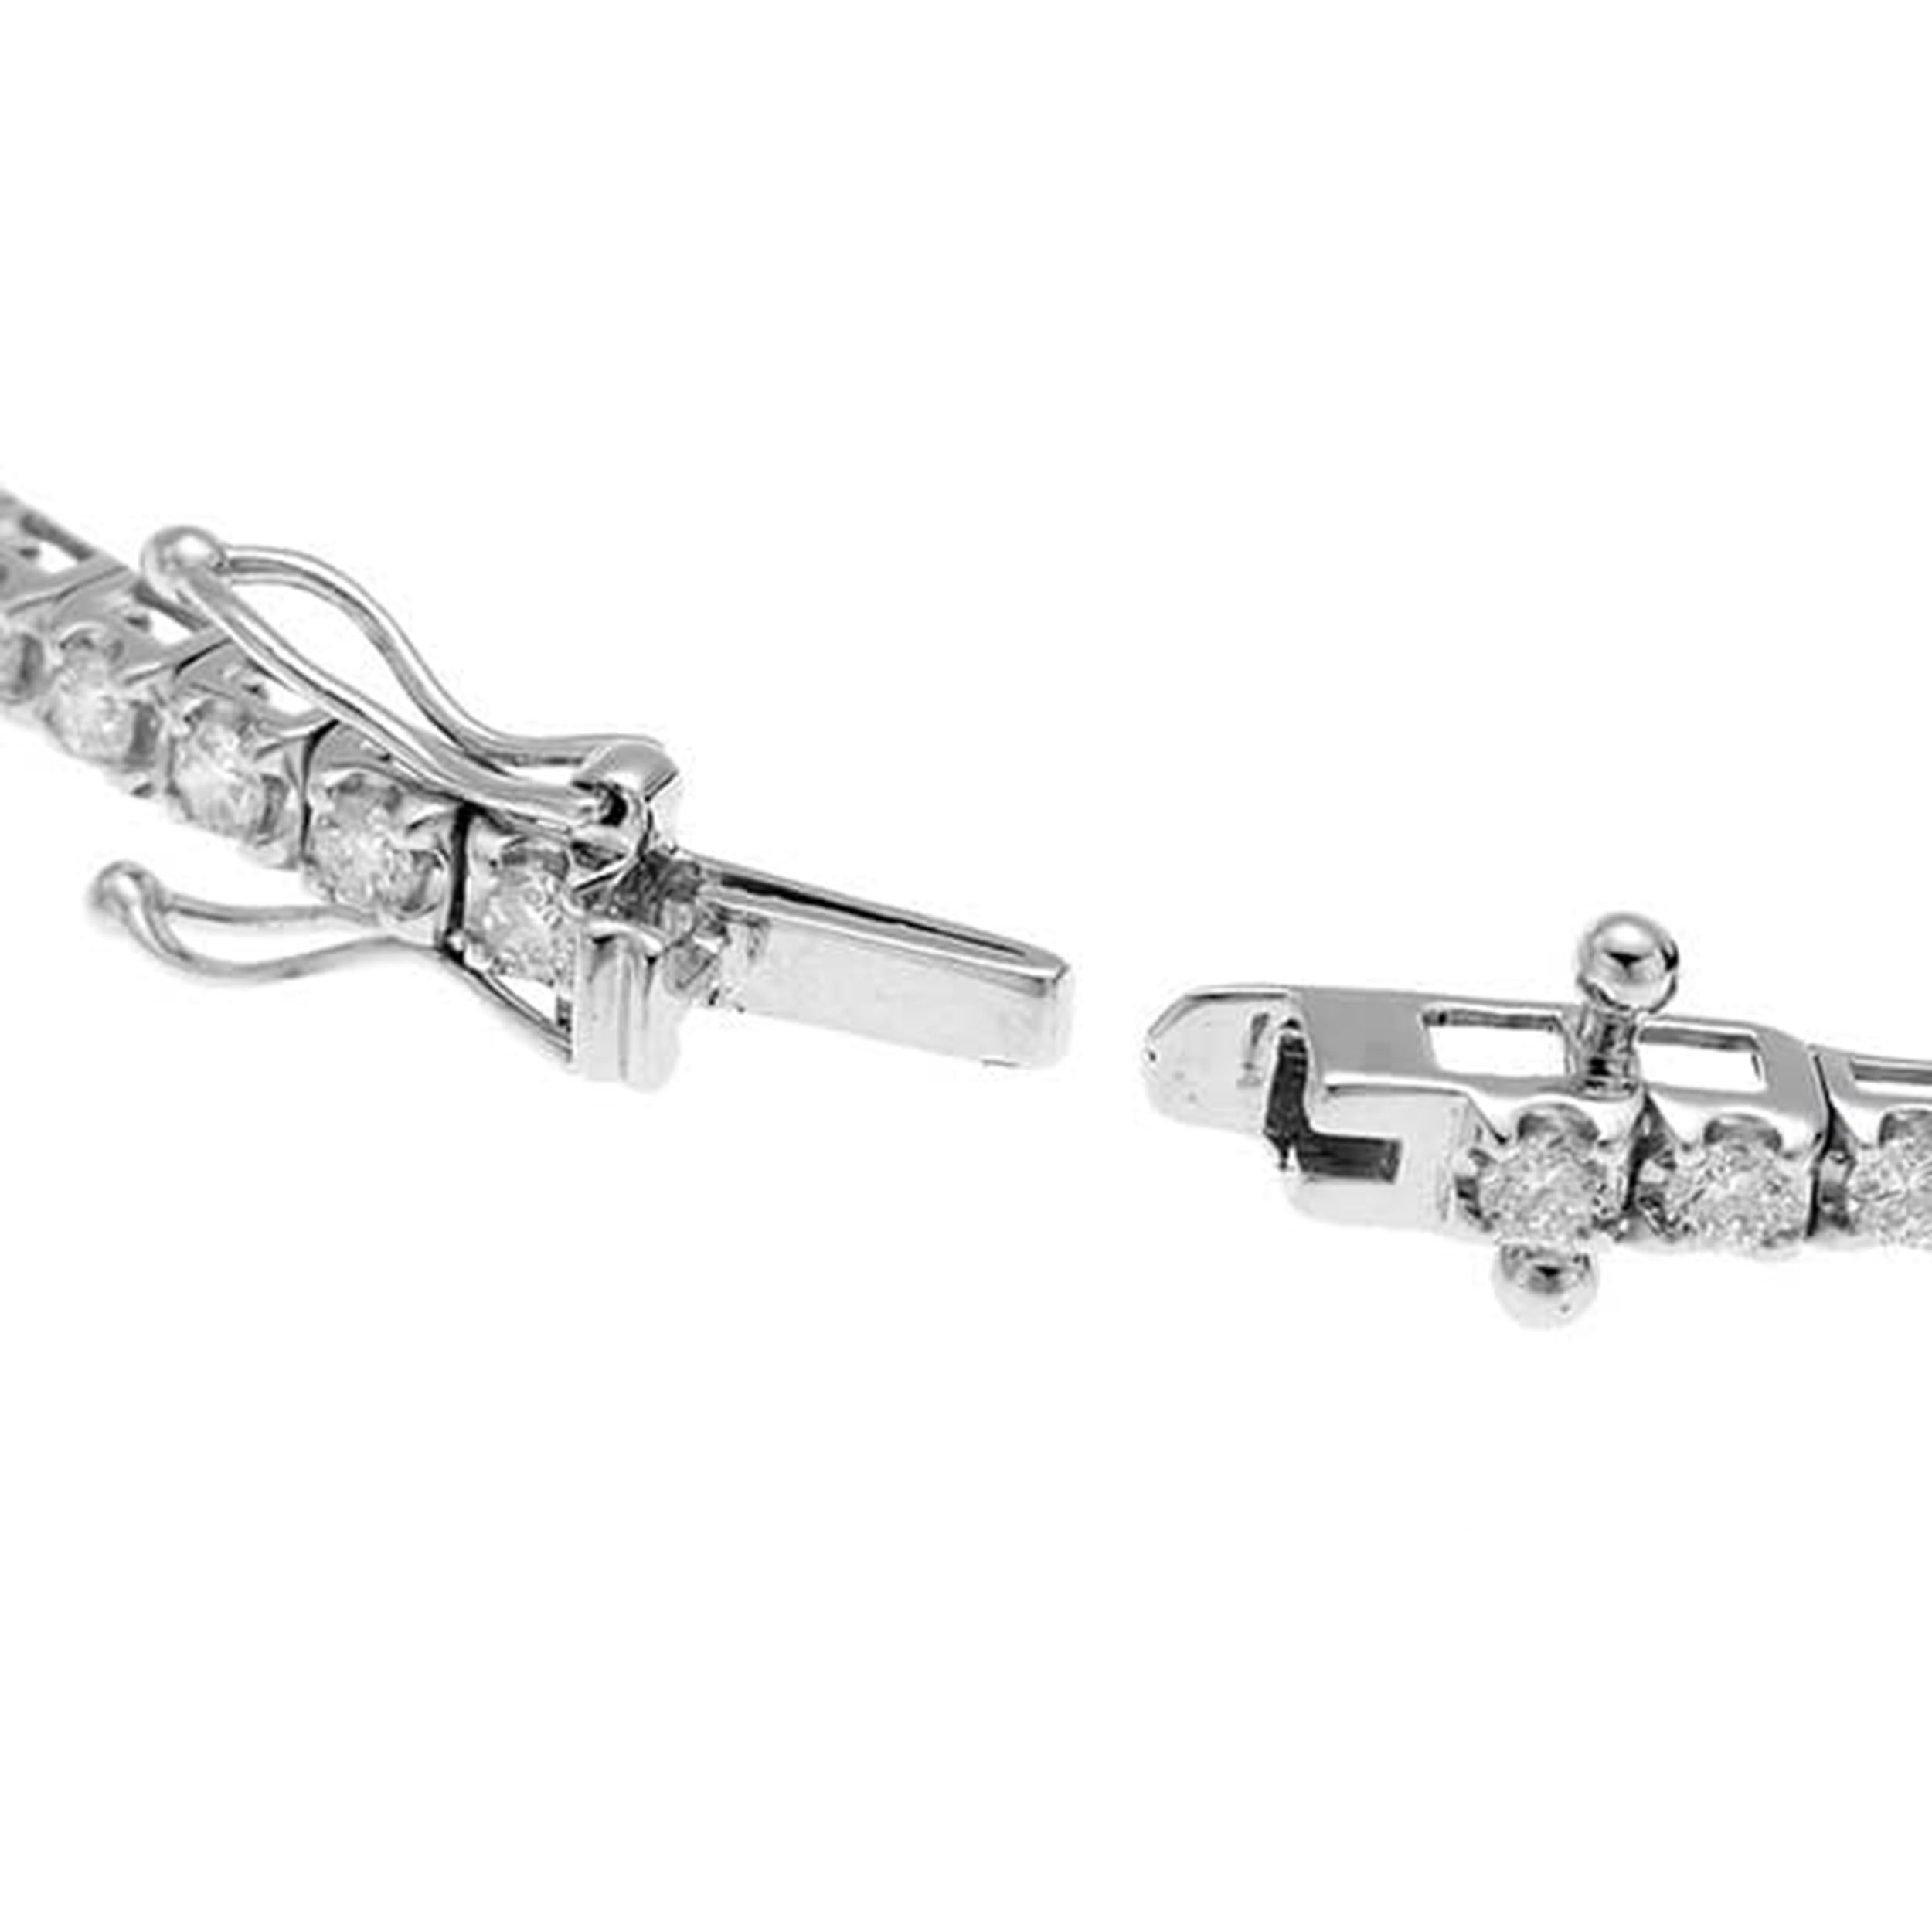 Artist 18K White Gold Diamond Tennis Bracelet  5.17ct Total Weight  Approx. 18cm  For Sale